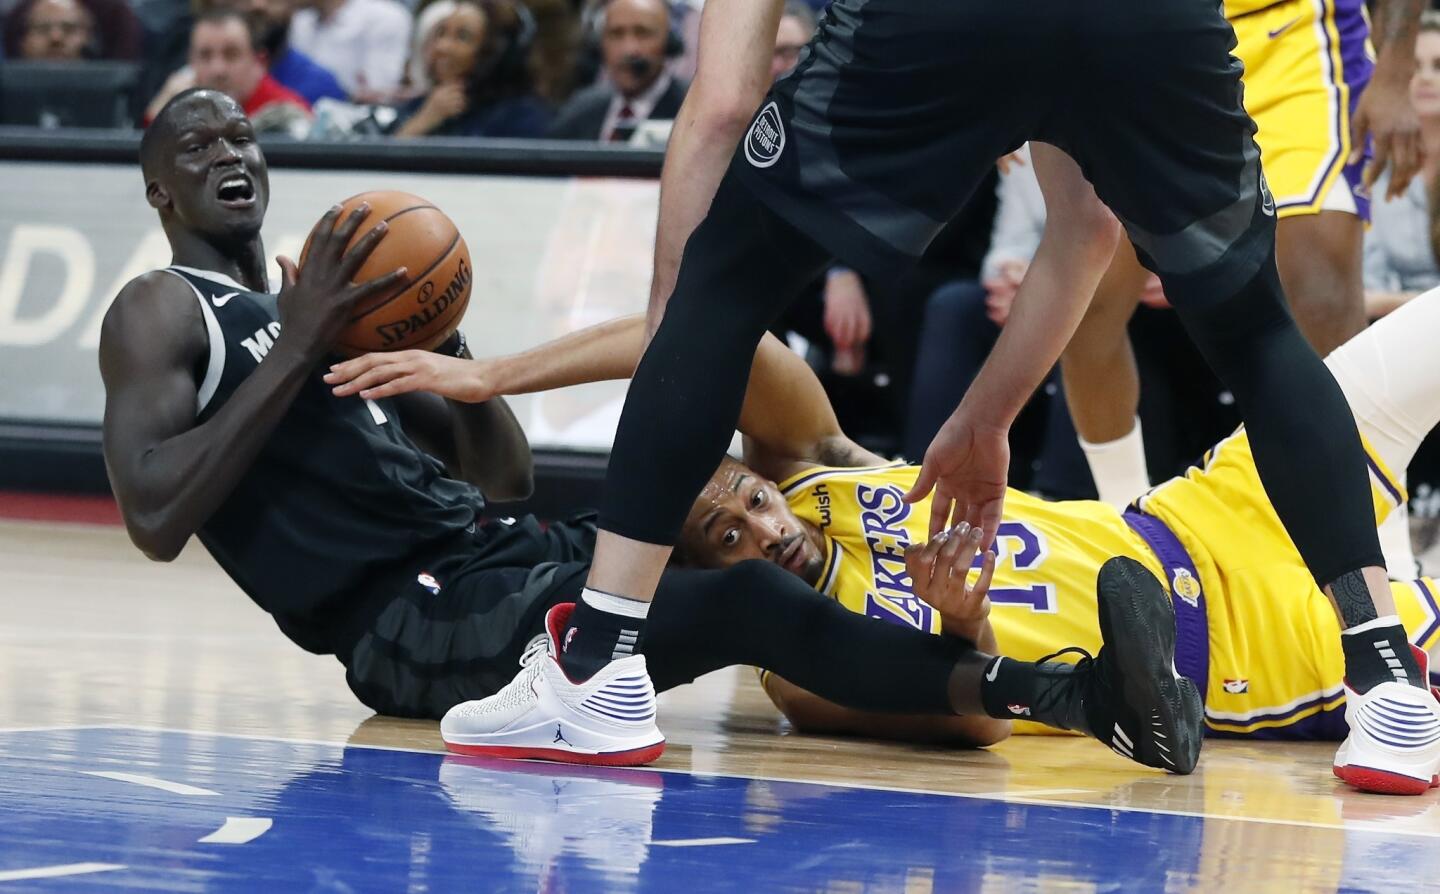 Los Angeles Lakers forward Johnathan Williams (19) and Detroit Pistons forward Thon Maker (7) try to control the loose ball during the first half of an NBA basketball game, Friday, March 15, 2019, in Detroit. (AP Photo/Carlos Osorio)